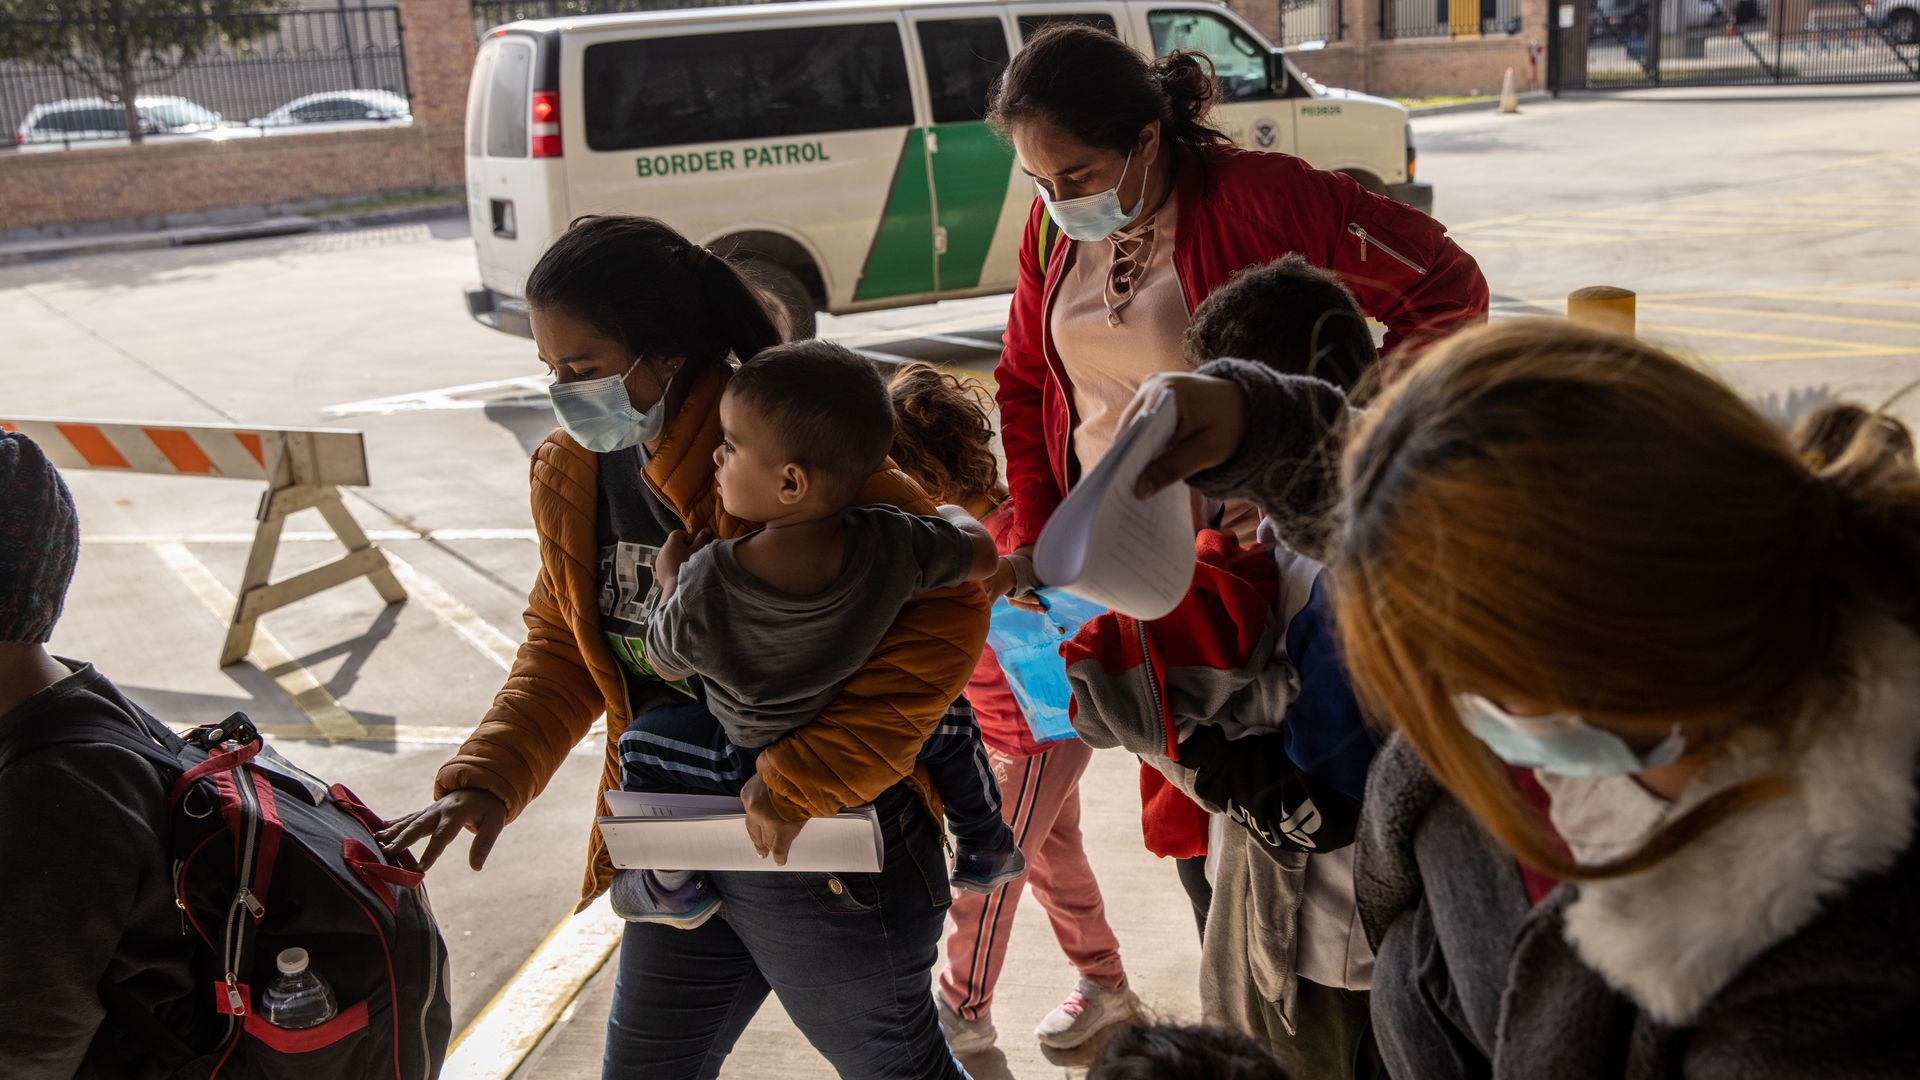 A family of Central American asylum seekers arrives to a bus station after being dropped off by U.S. Border Patrol agents on February 25, 2021 in Brownsville, Texas. 